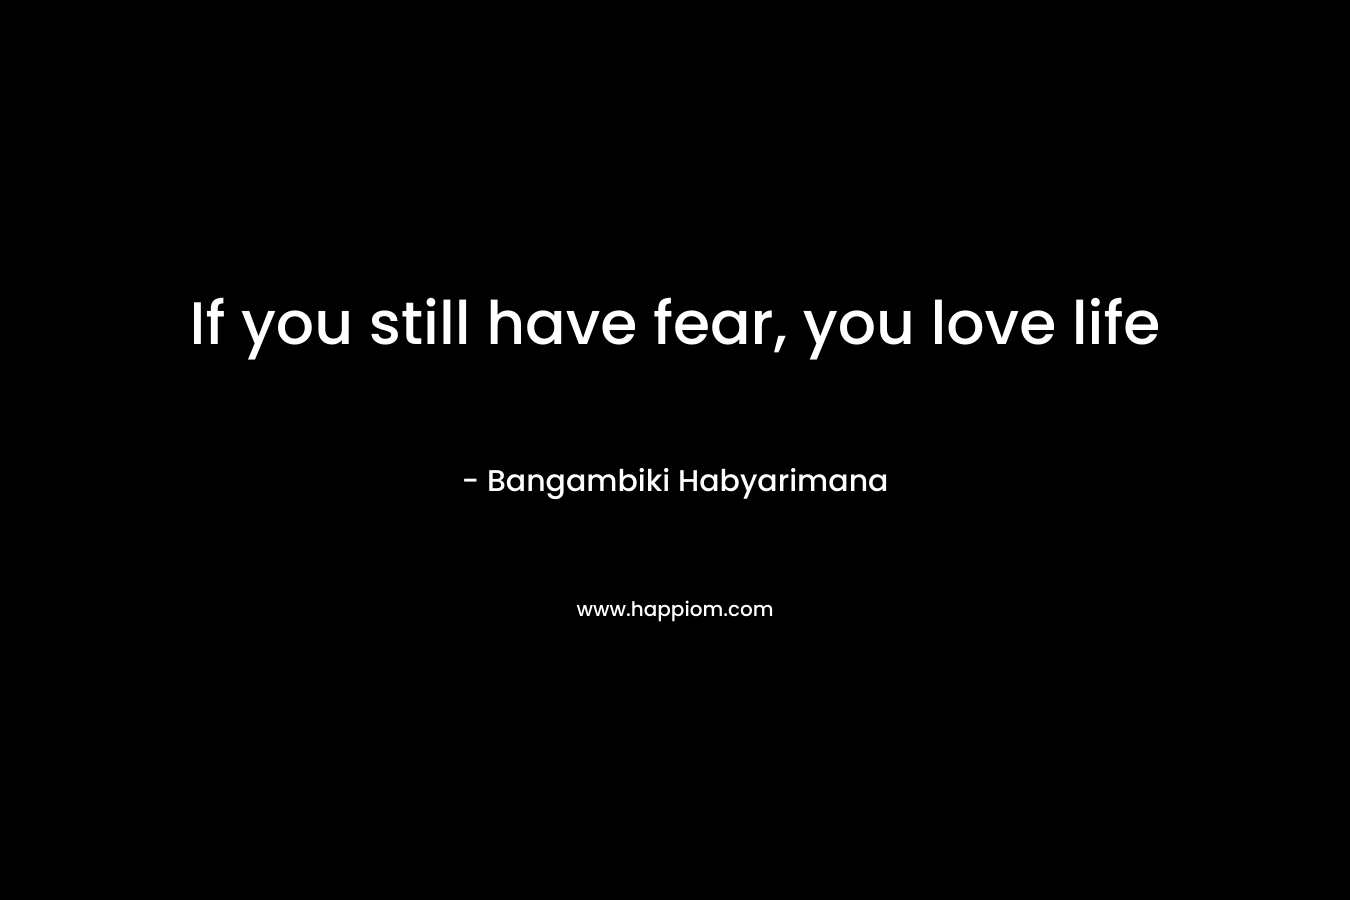 If you still have fear, you love life